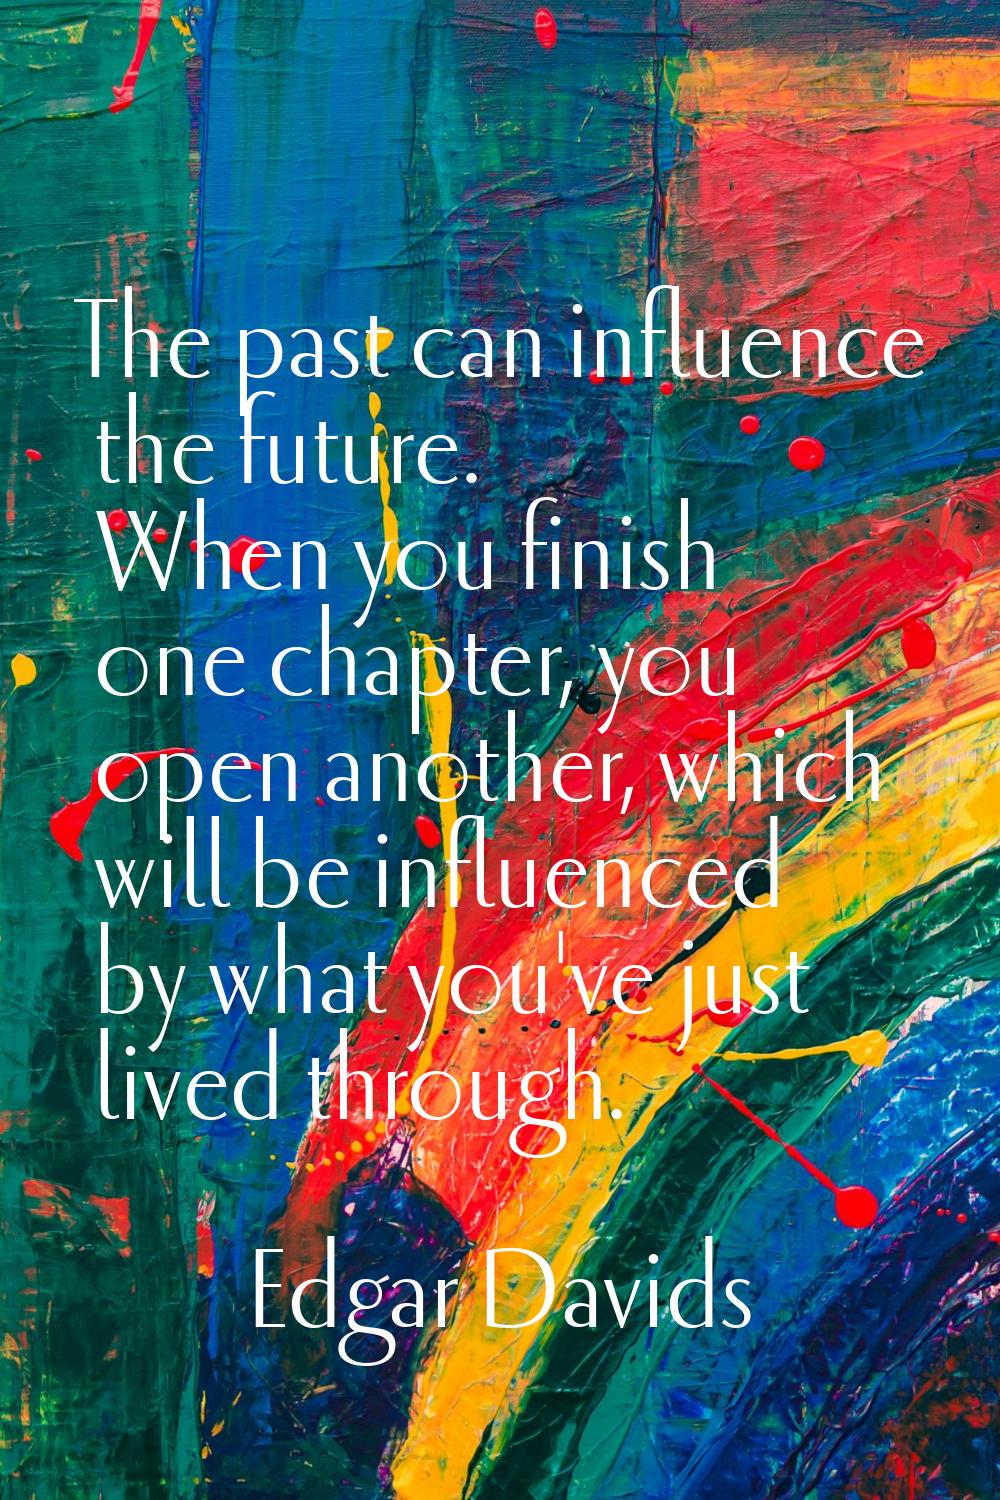 The past can influence the future. When you finish one chapter, you open another, which will be inf